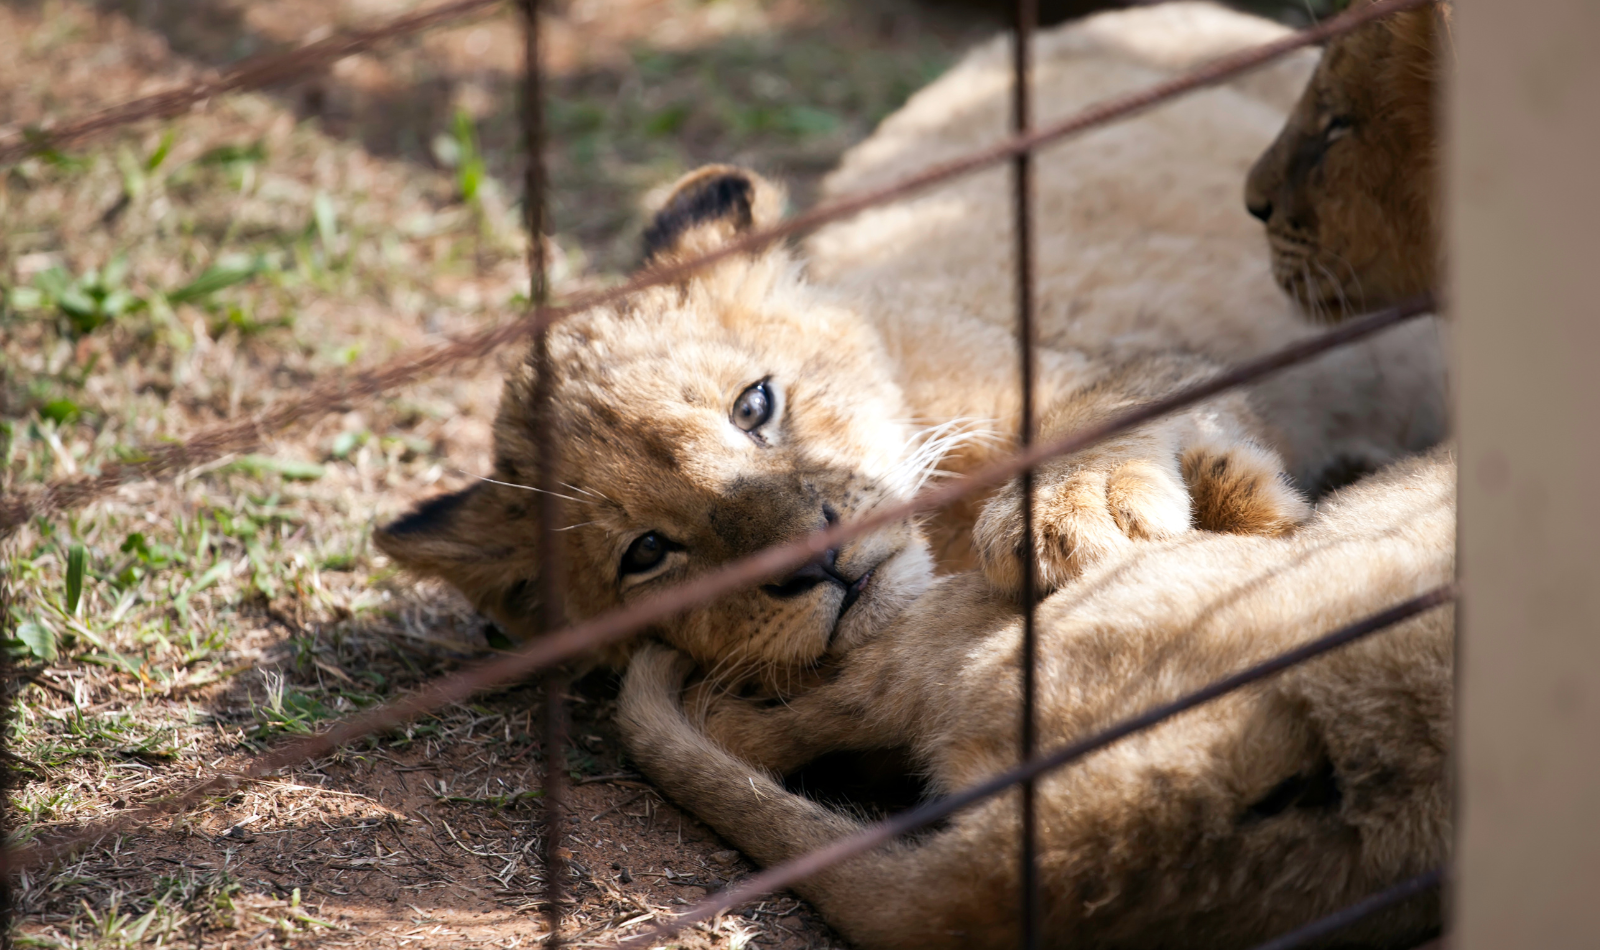 A photo of two lion cubs in captivity.